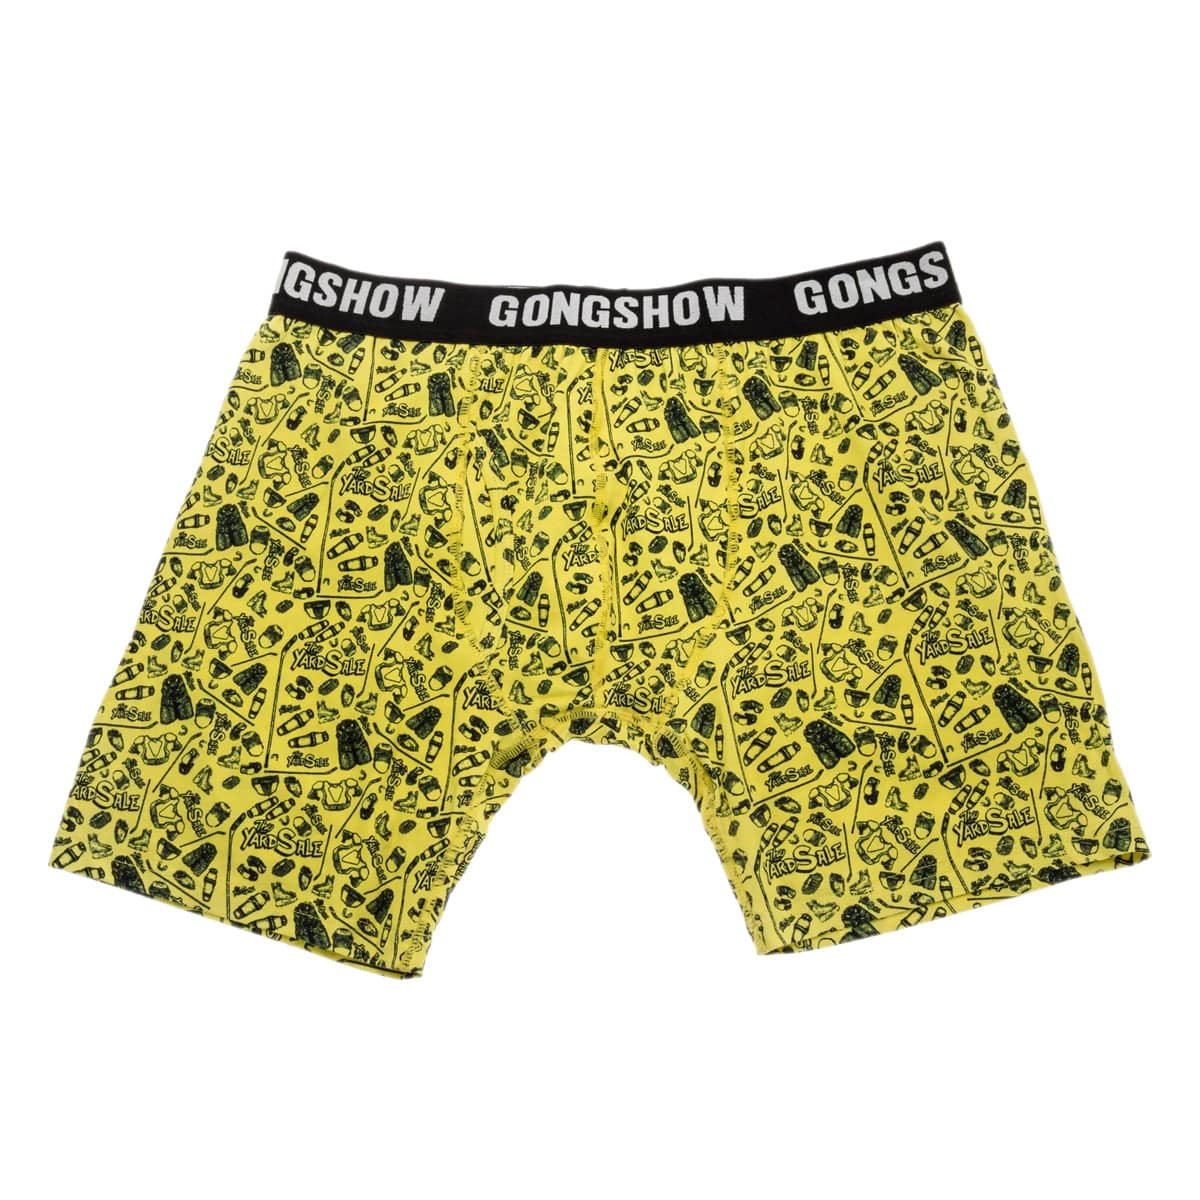 Gongshow Hockey Yard Sale Boxers - The Hockey Shop Source For Sports